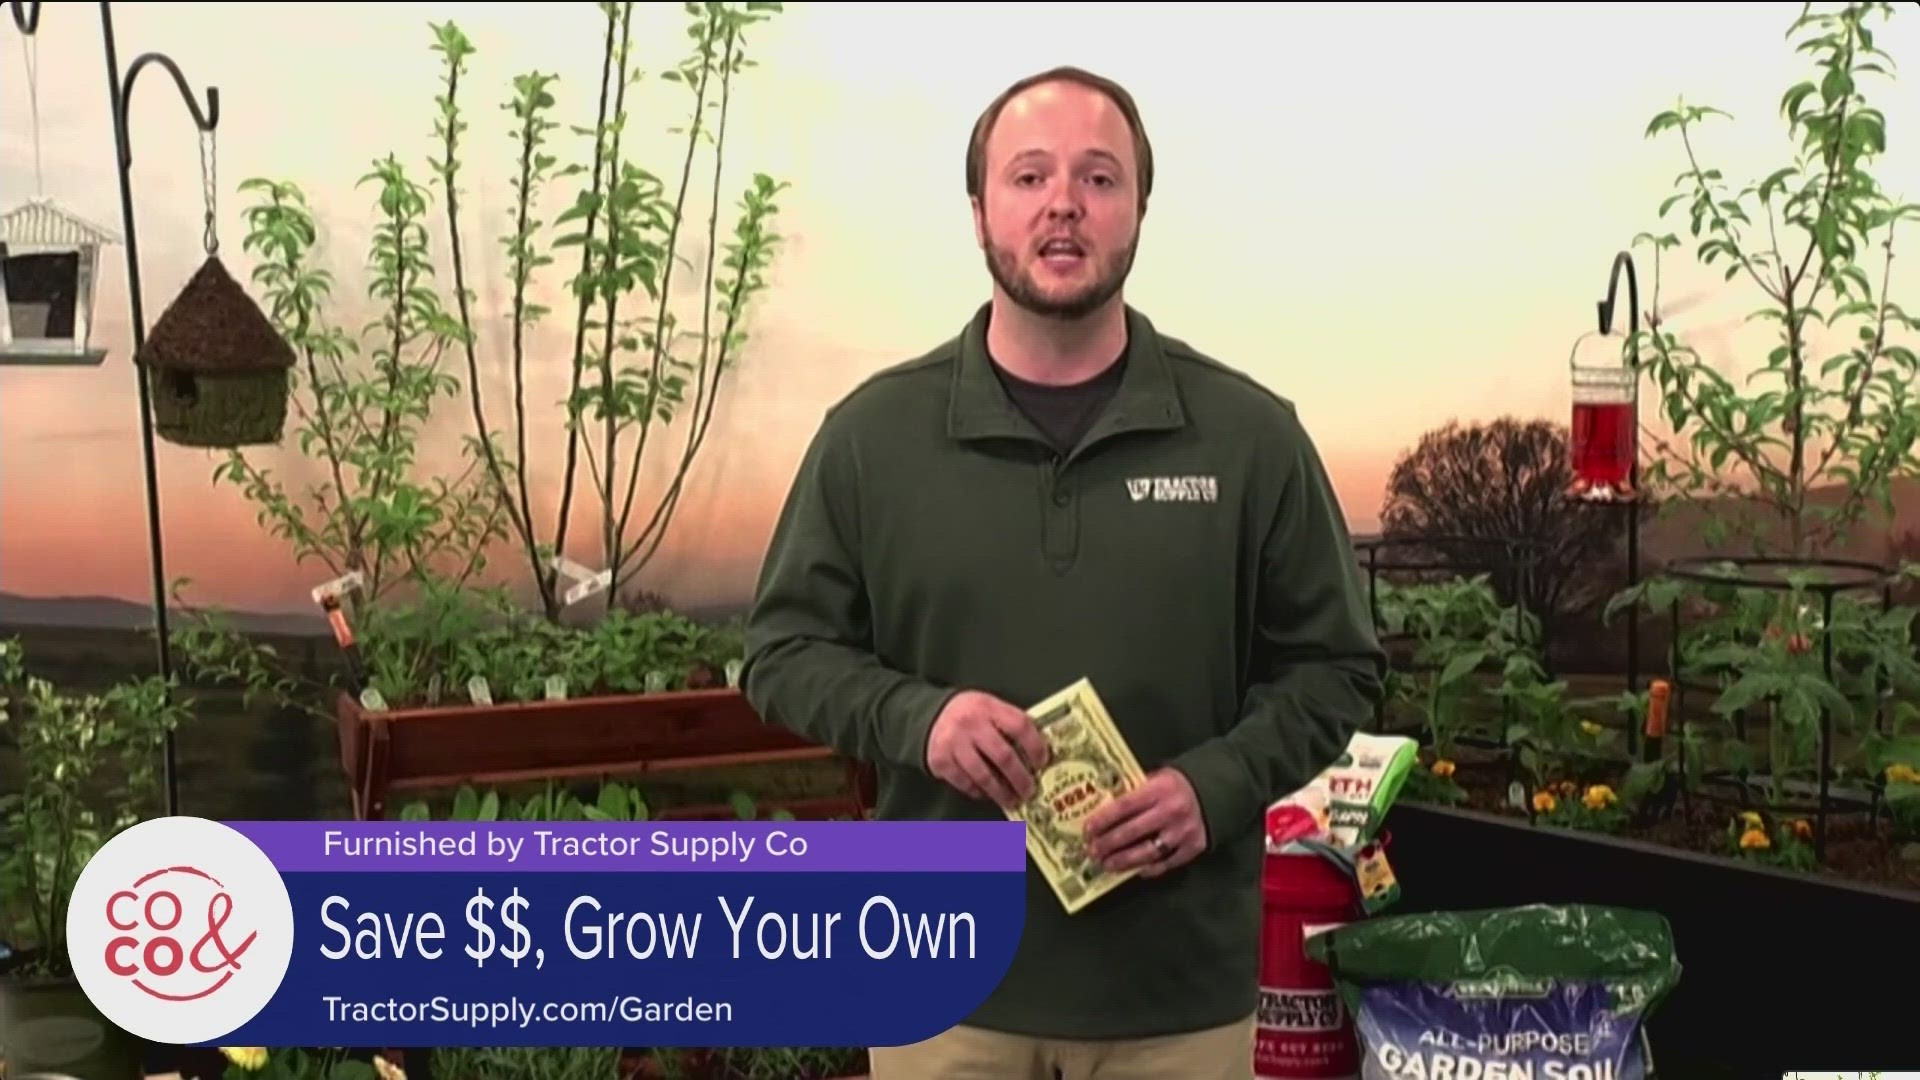 Save some green by growing some green! Visit TractorSupply.com/Garden to learn more.